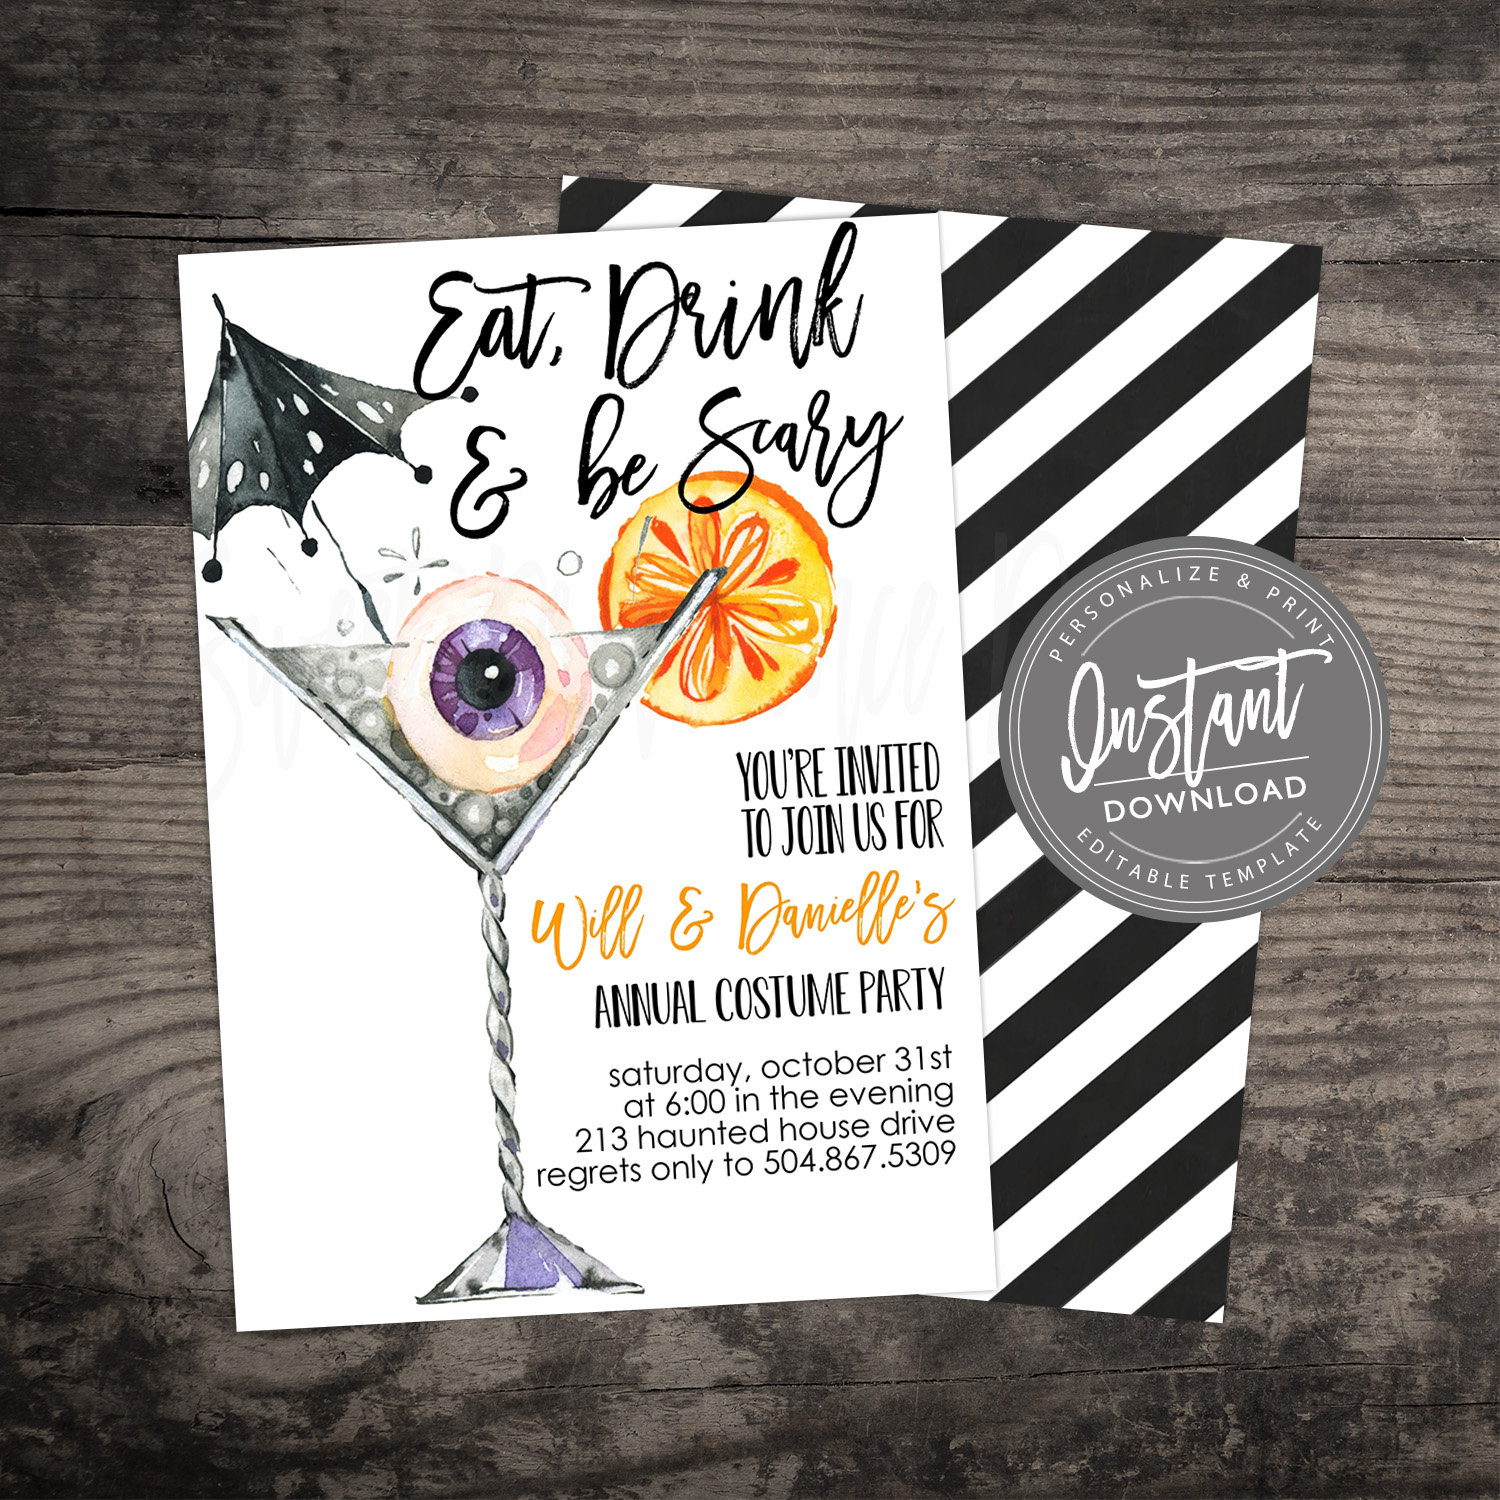 halloween-costume-party-invitation-eat-drink-and-be-scary-halloween